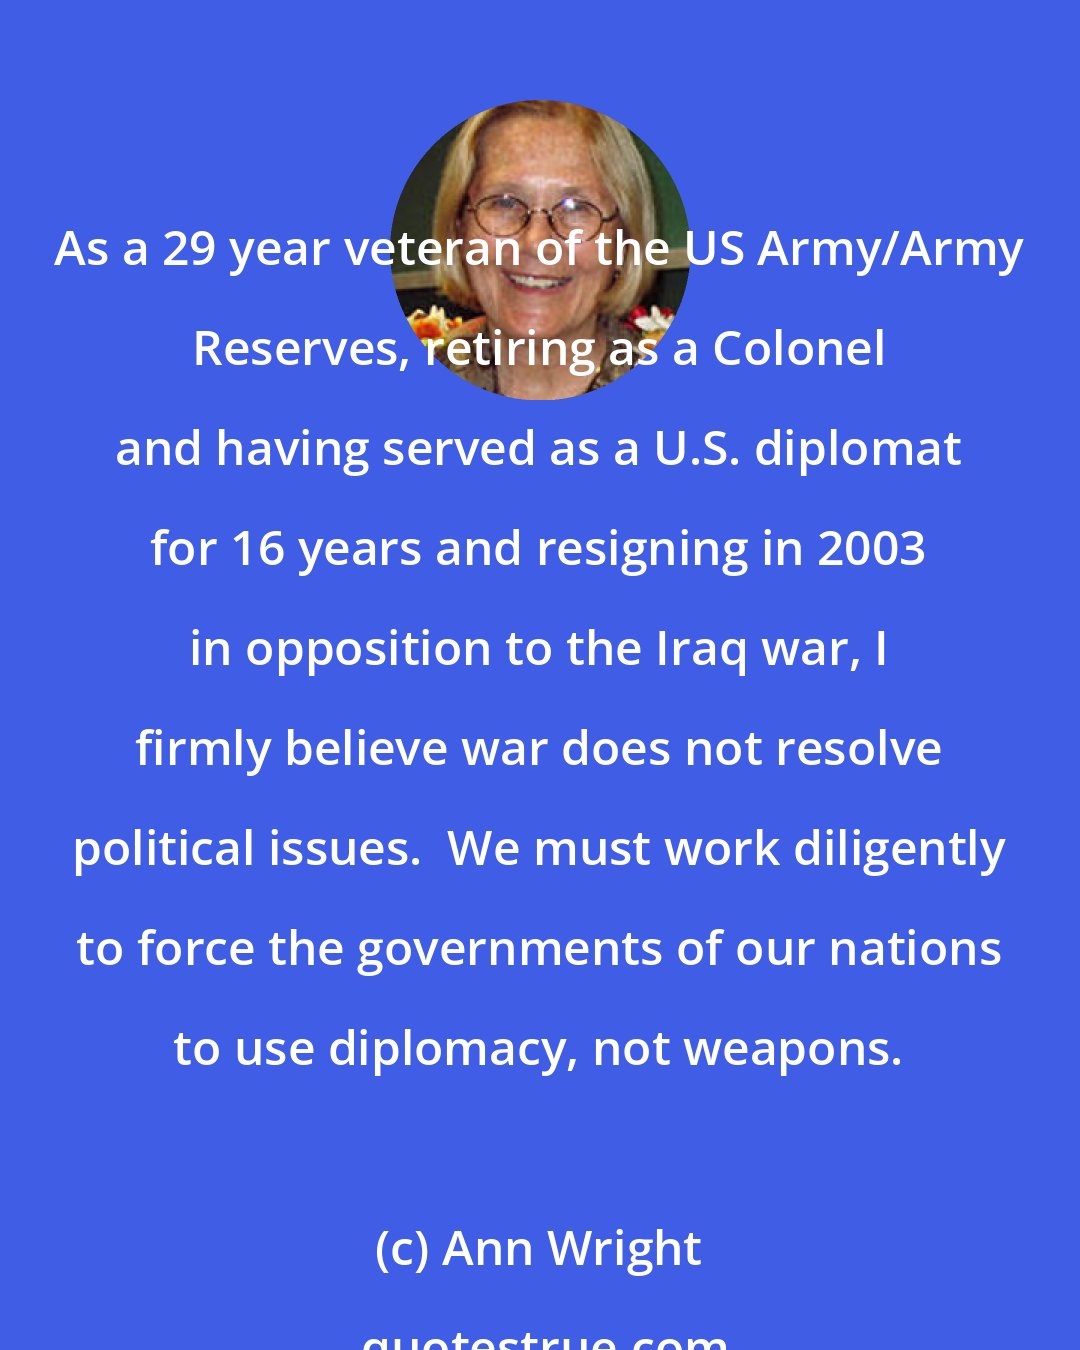 Ann Wright: As a 29 year veteran of the US Army/Army Reserves, retiring as a Colonel and having served as a U.S. diplomat for 16 years and resigning in 2003 in opposition to the Iraq war, I firmly believe war does not resolve political issues.  We must work diligently to force the governments of our nations to use diplomacy, not weapons.